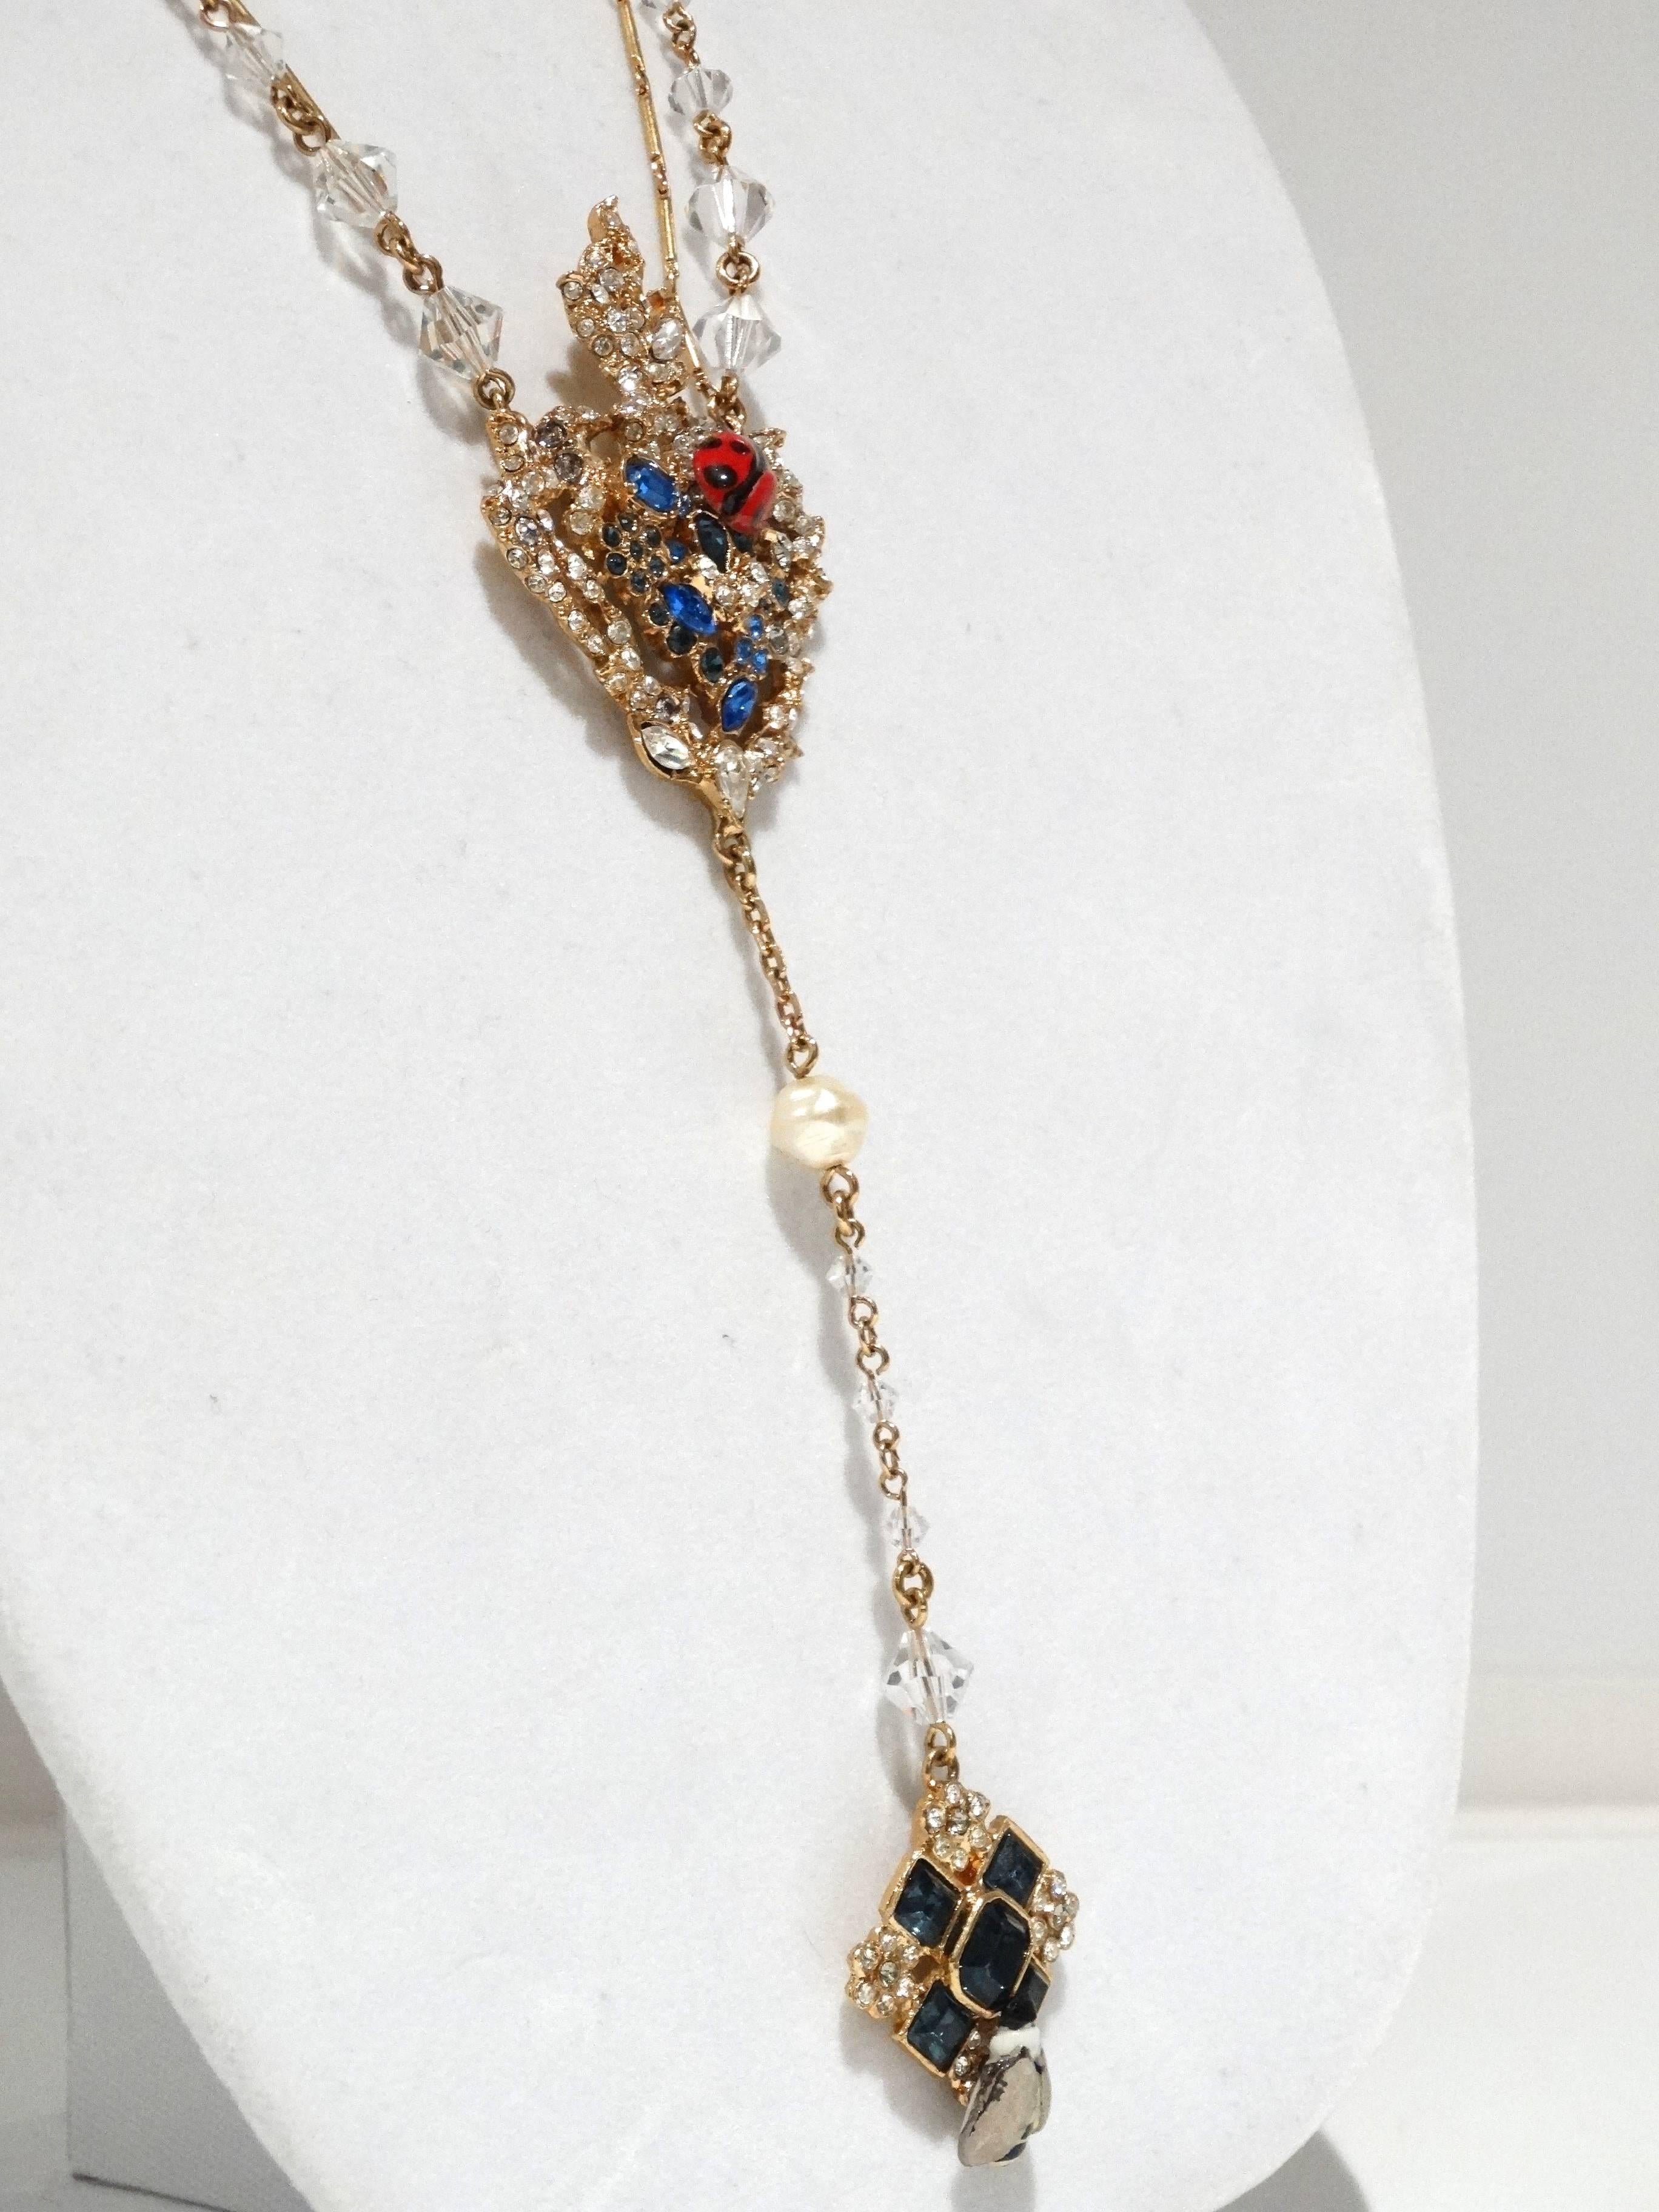 From the house of Lacroix this beautiful two strand necklace is devine. The necklace has a large center pendent which is heart shaped (a signature with Lacroix) with a touch of crystal blue and clear rhinestones enamel ladybug. Off the main center